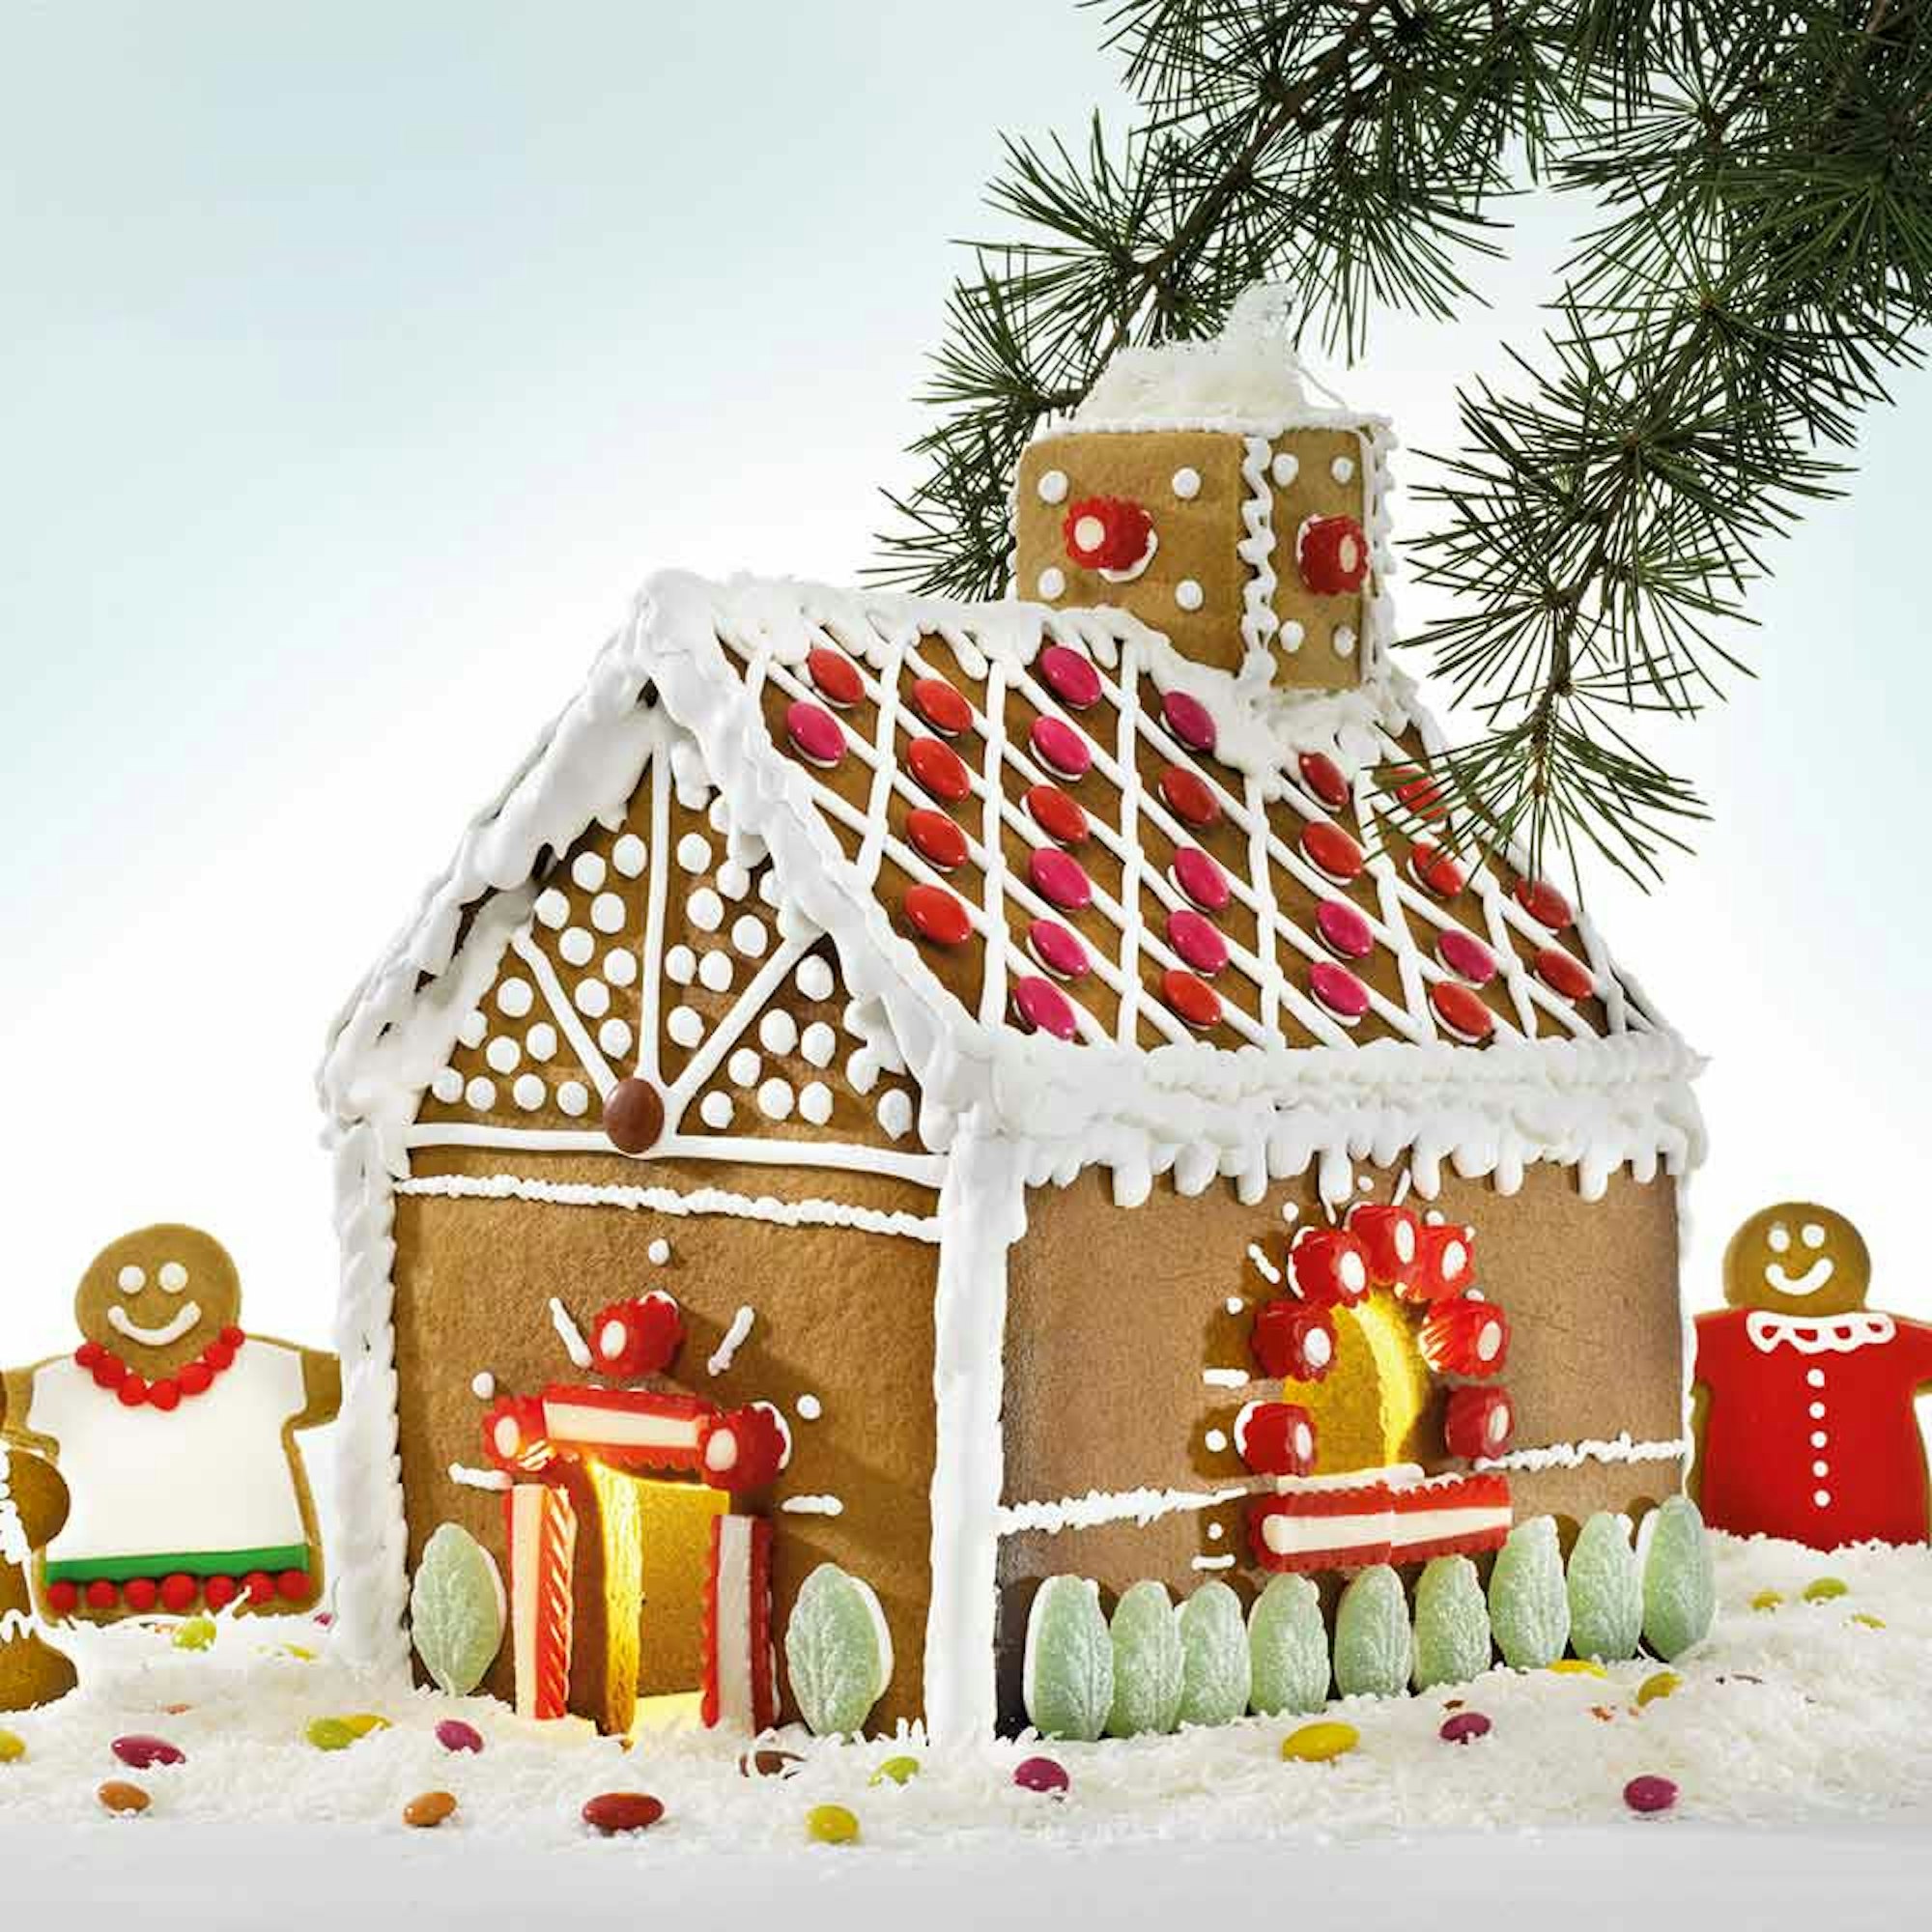 Gingerbread House recipe Robins Kitchen blog. Gingerbread house with gingerbread people decorated with icing, lollies, and coconut.